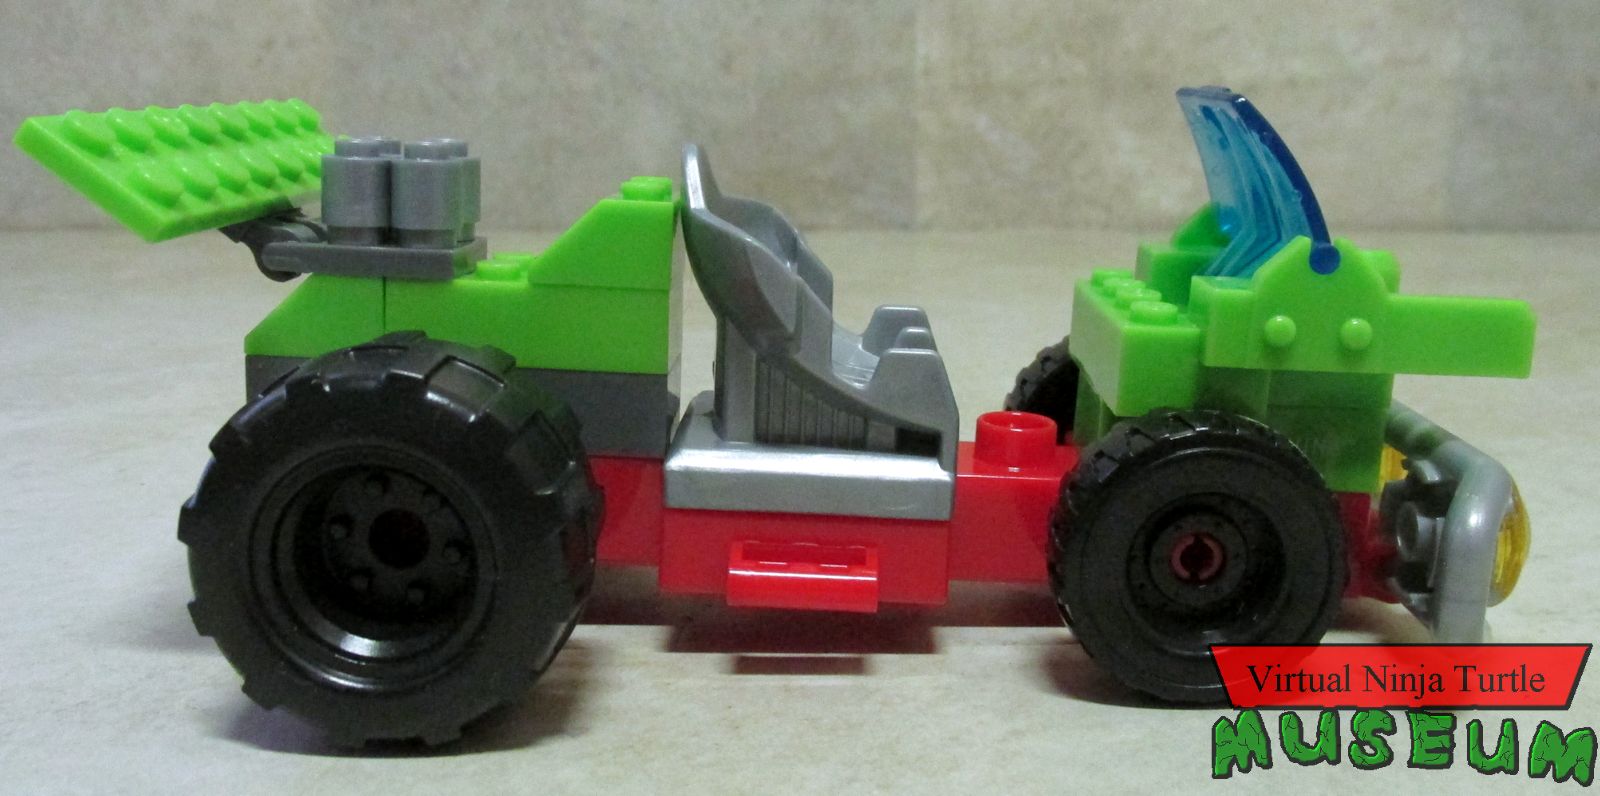 Turtle Buggy side view 2